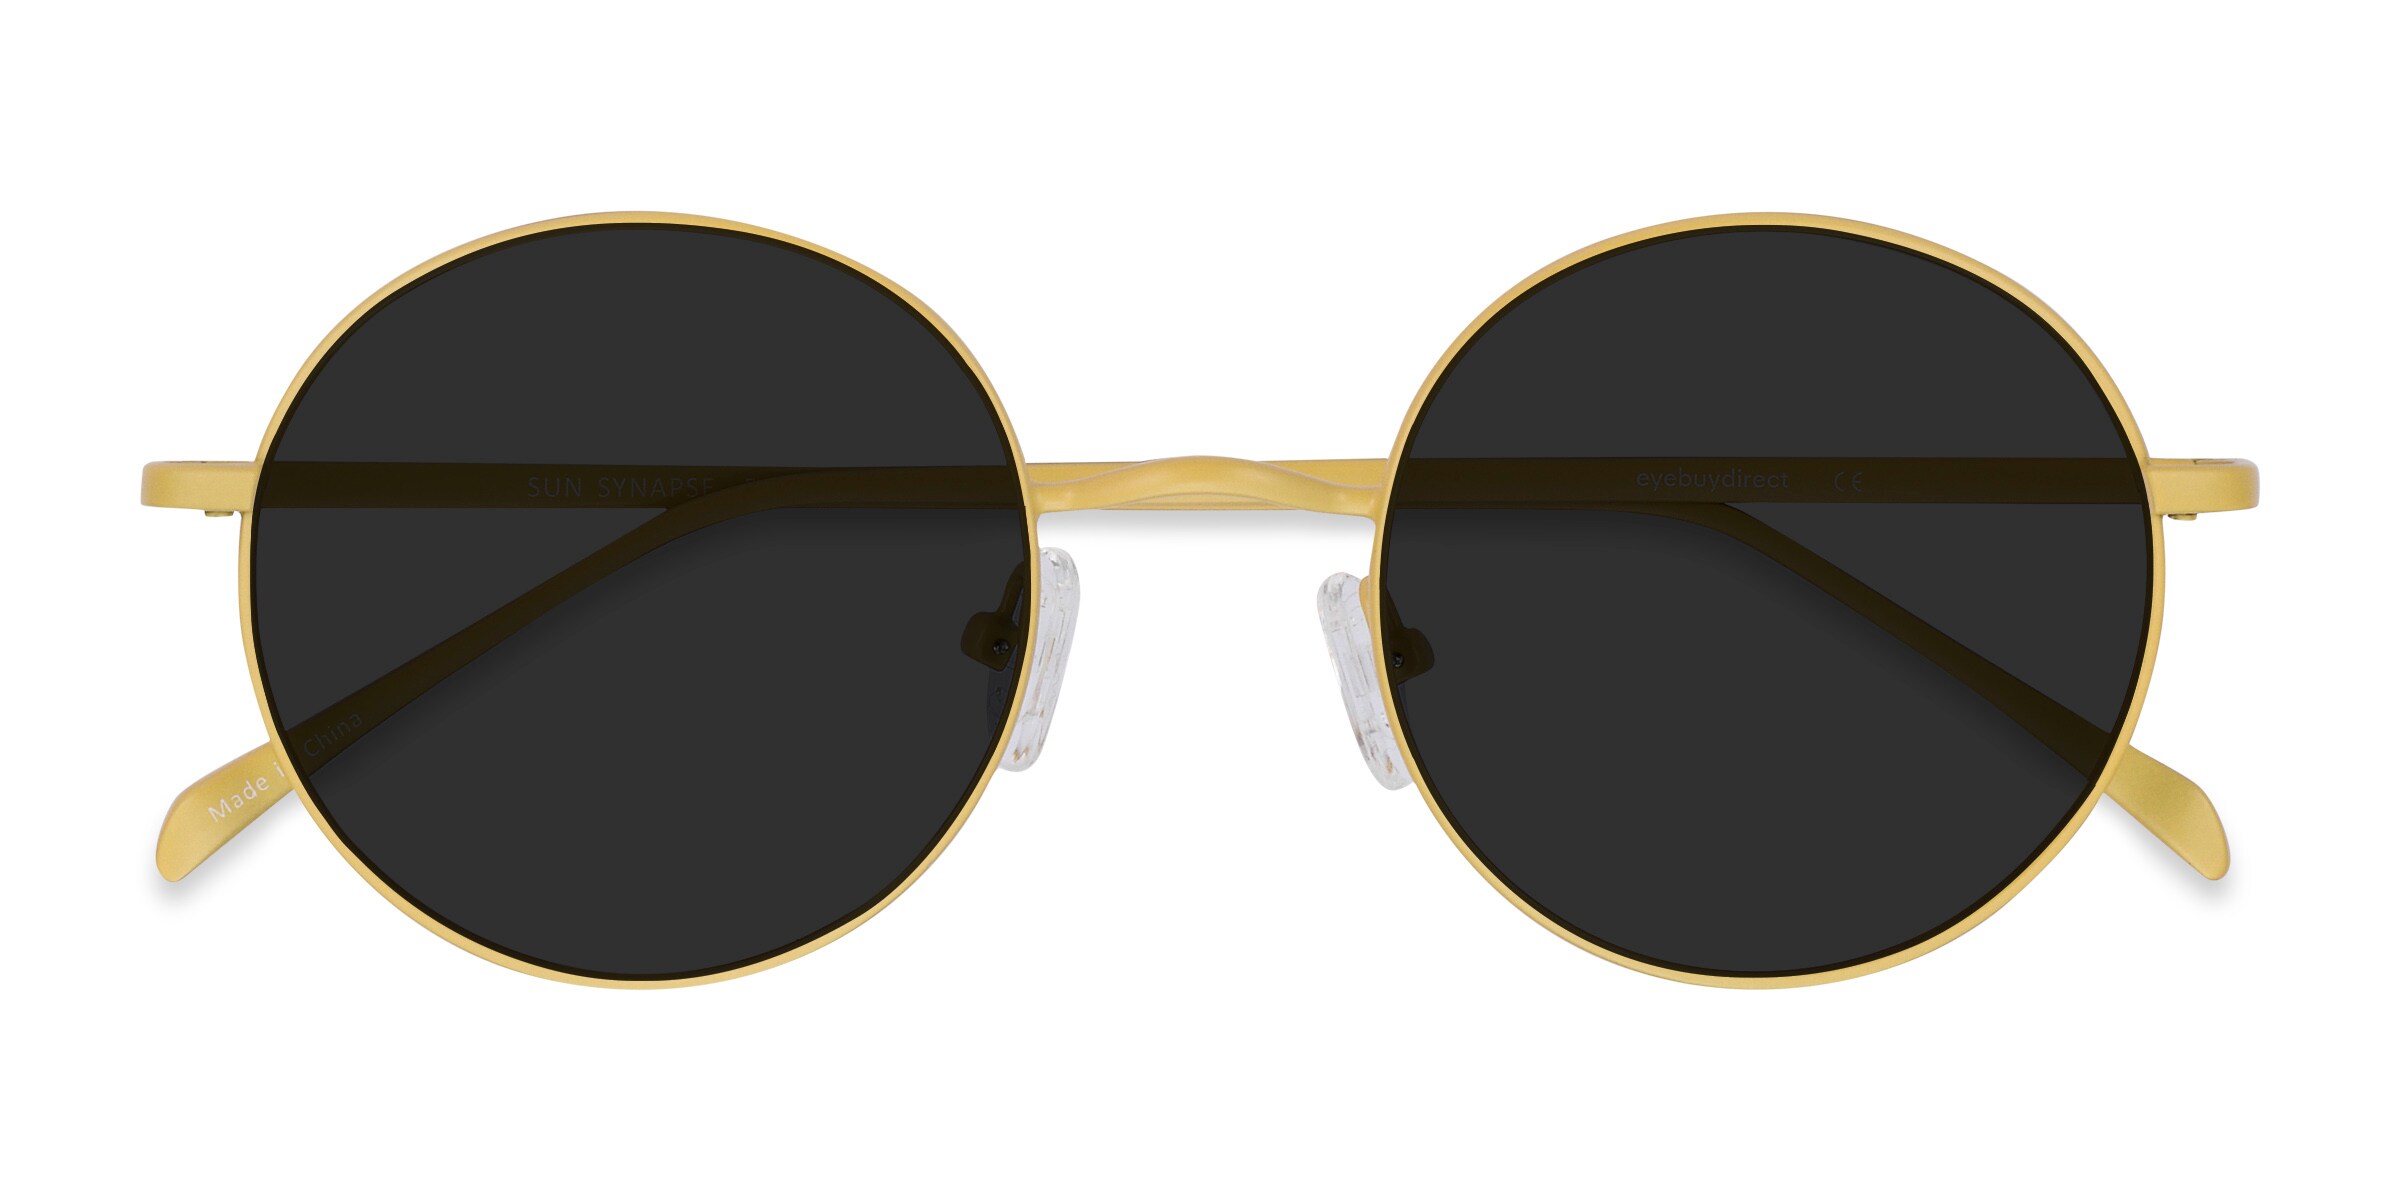 ELKLOOK Style with Round Yellow Sunglasses - Best Sellers 3-5 Day Rush  Delivery